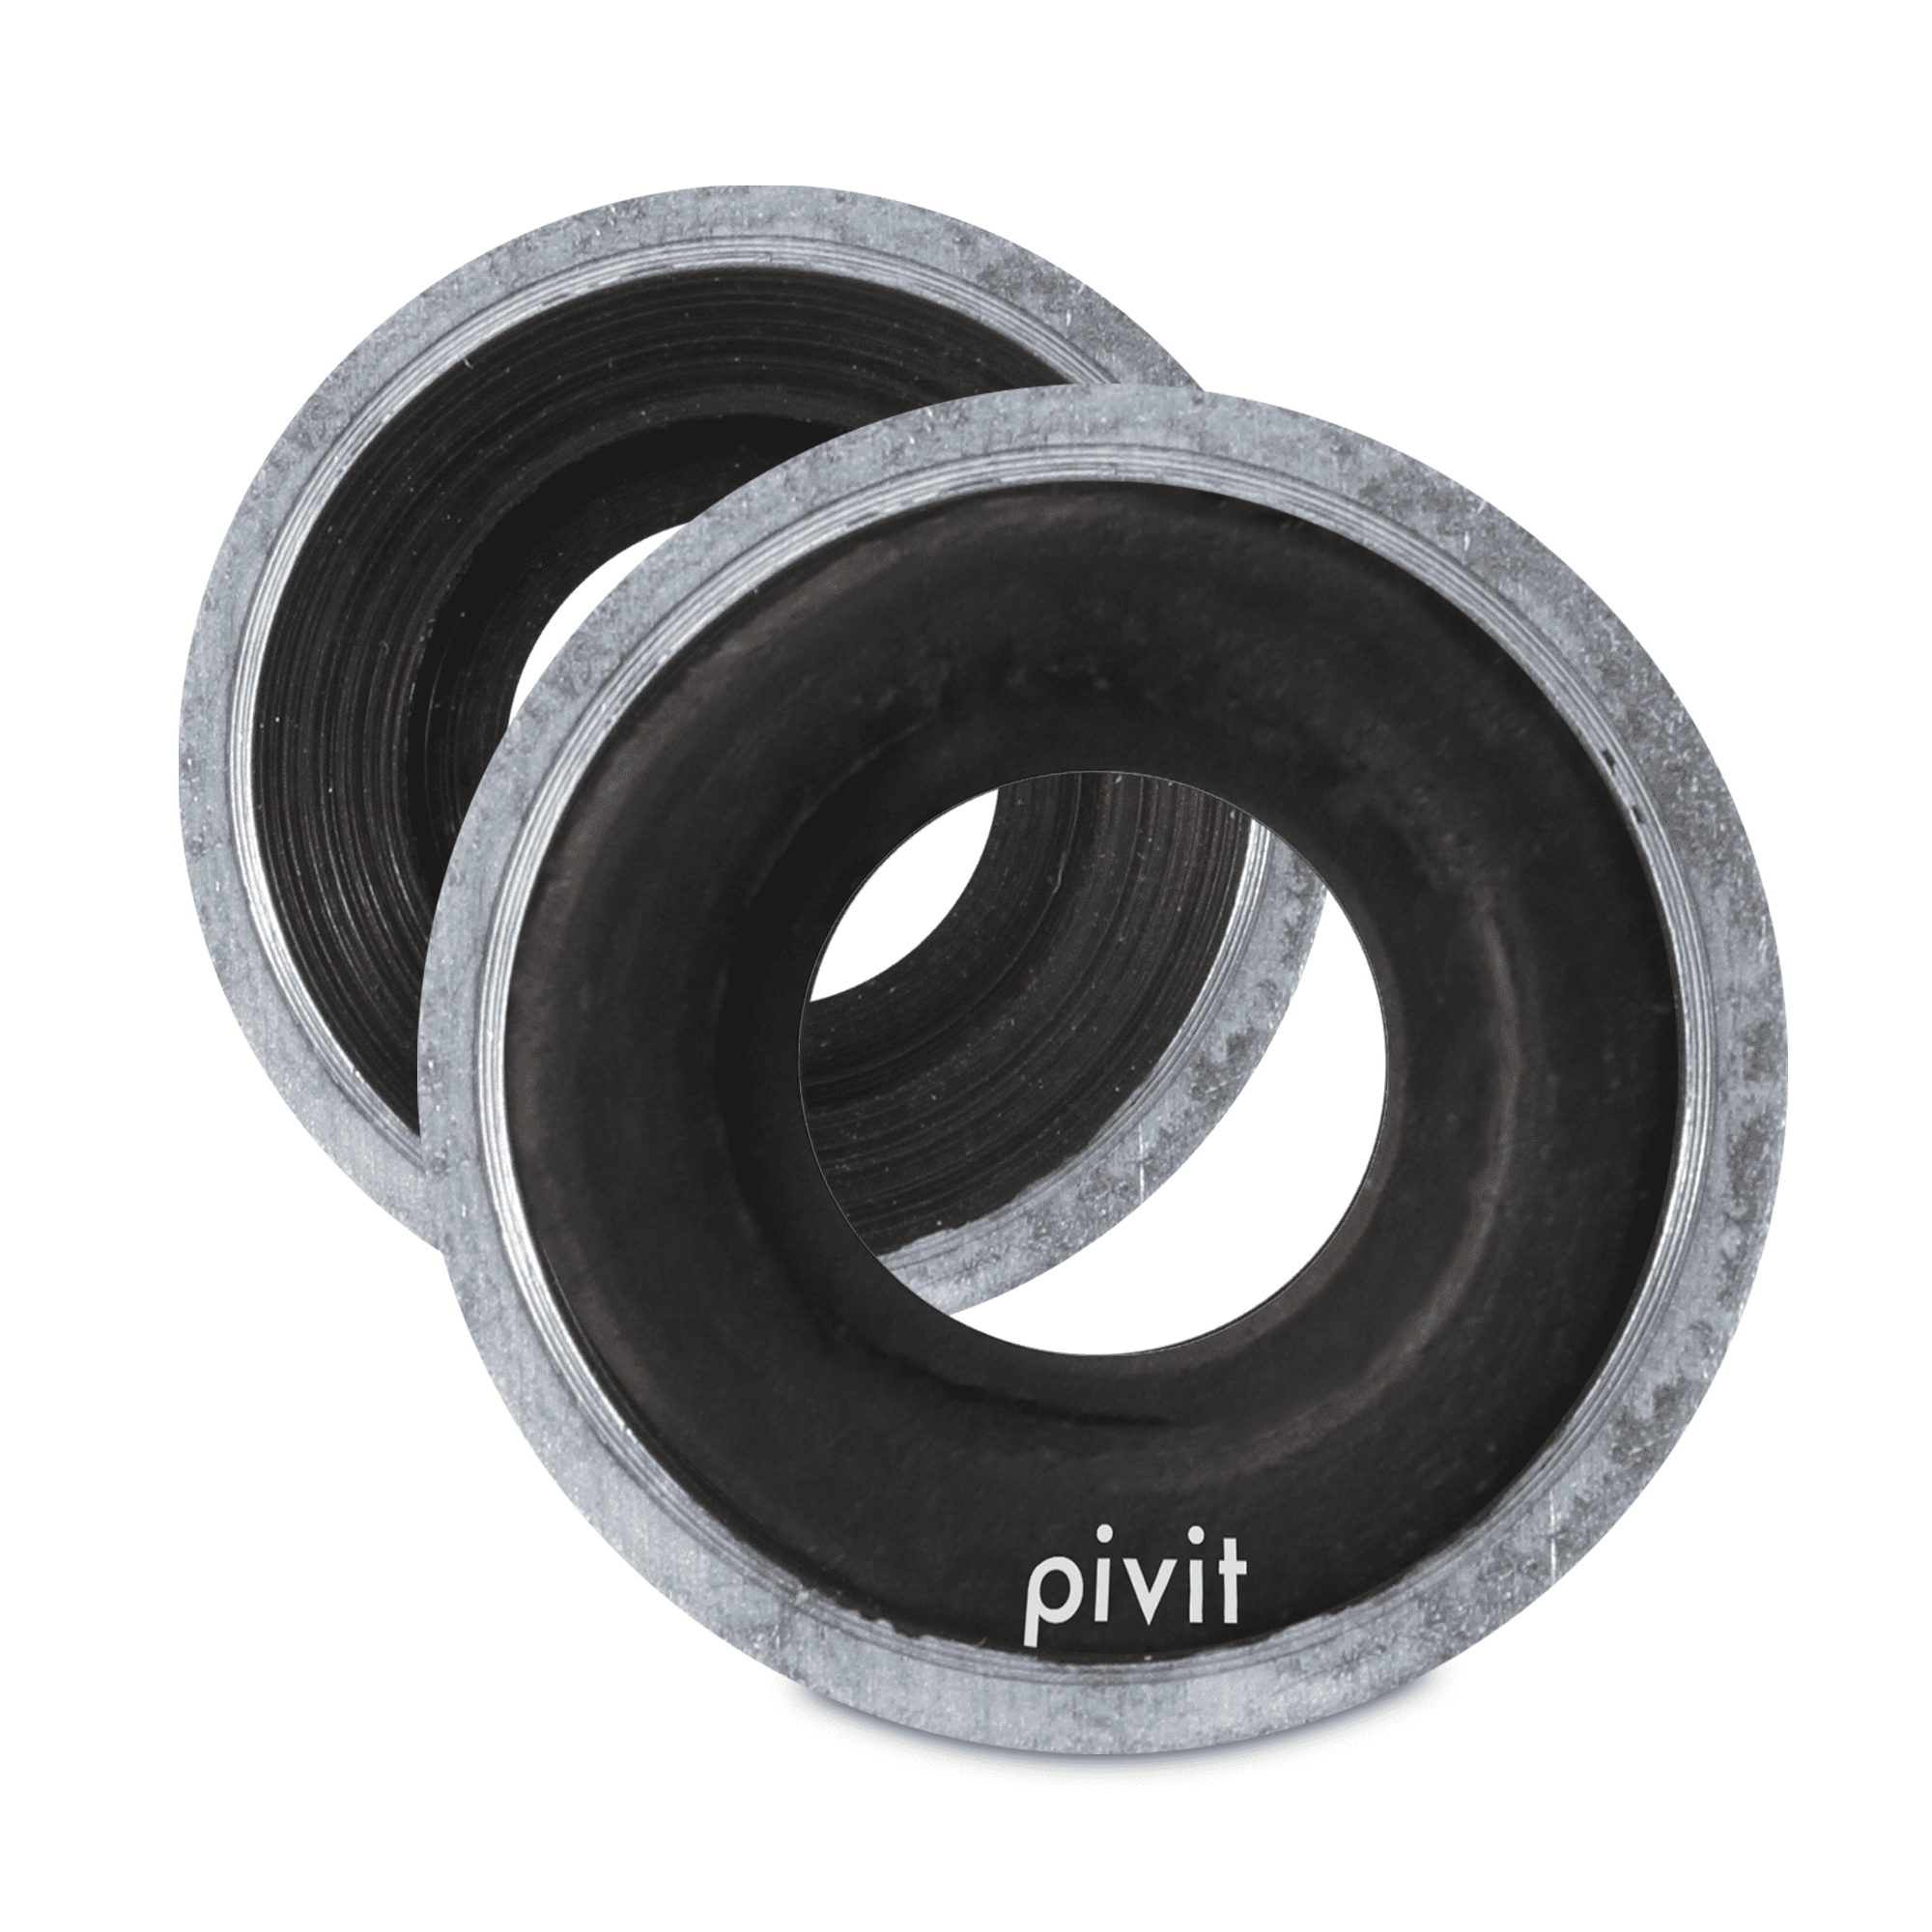 Pivit Aluminum Oxygen Tank Regulator Yoke Washers with Rubber Ring Seal Pack of 25 Crack-Resistant O-Ring Supplies with Viton o2 Washer Yokes for Small Medical CGA 870 Regulators